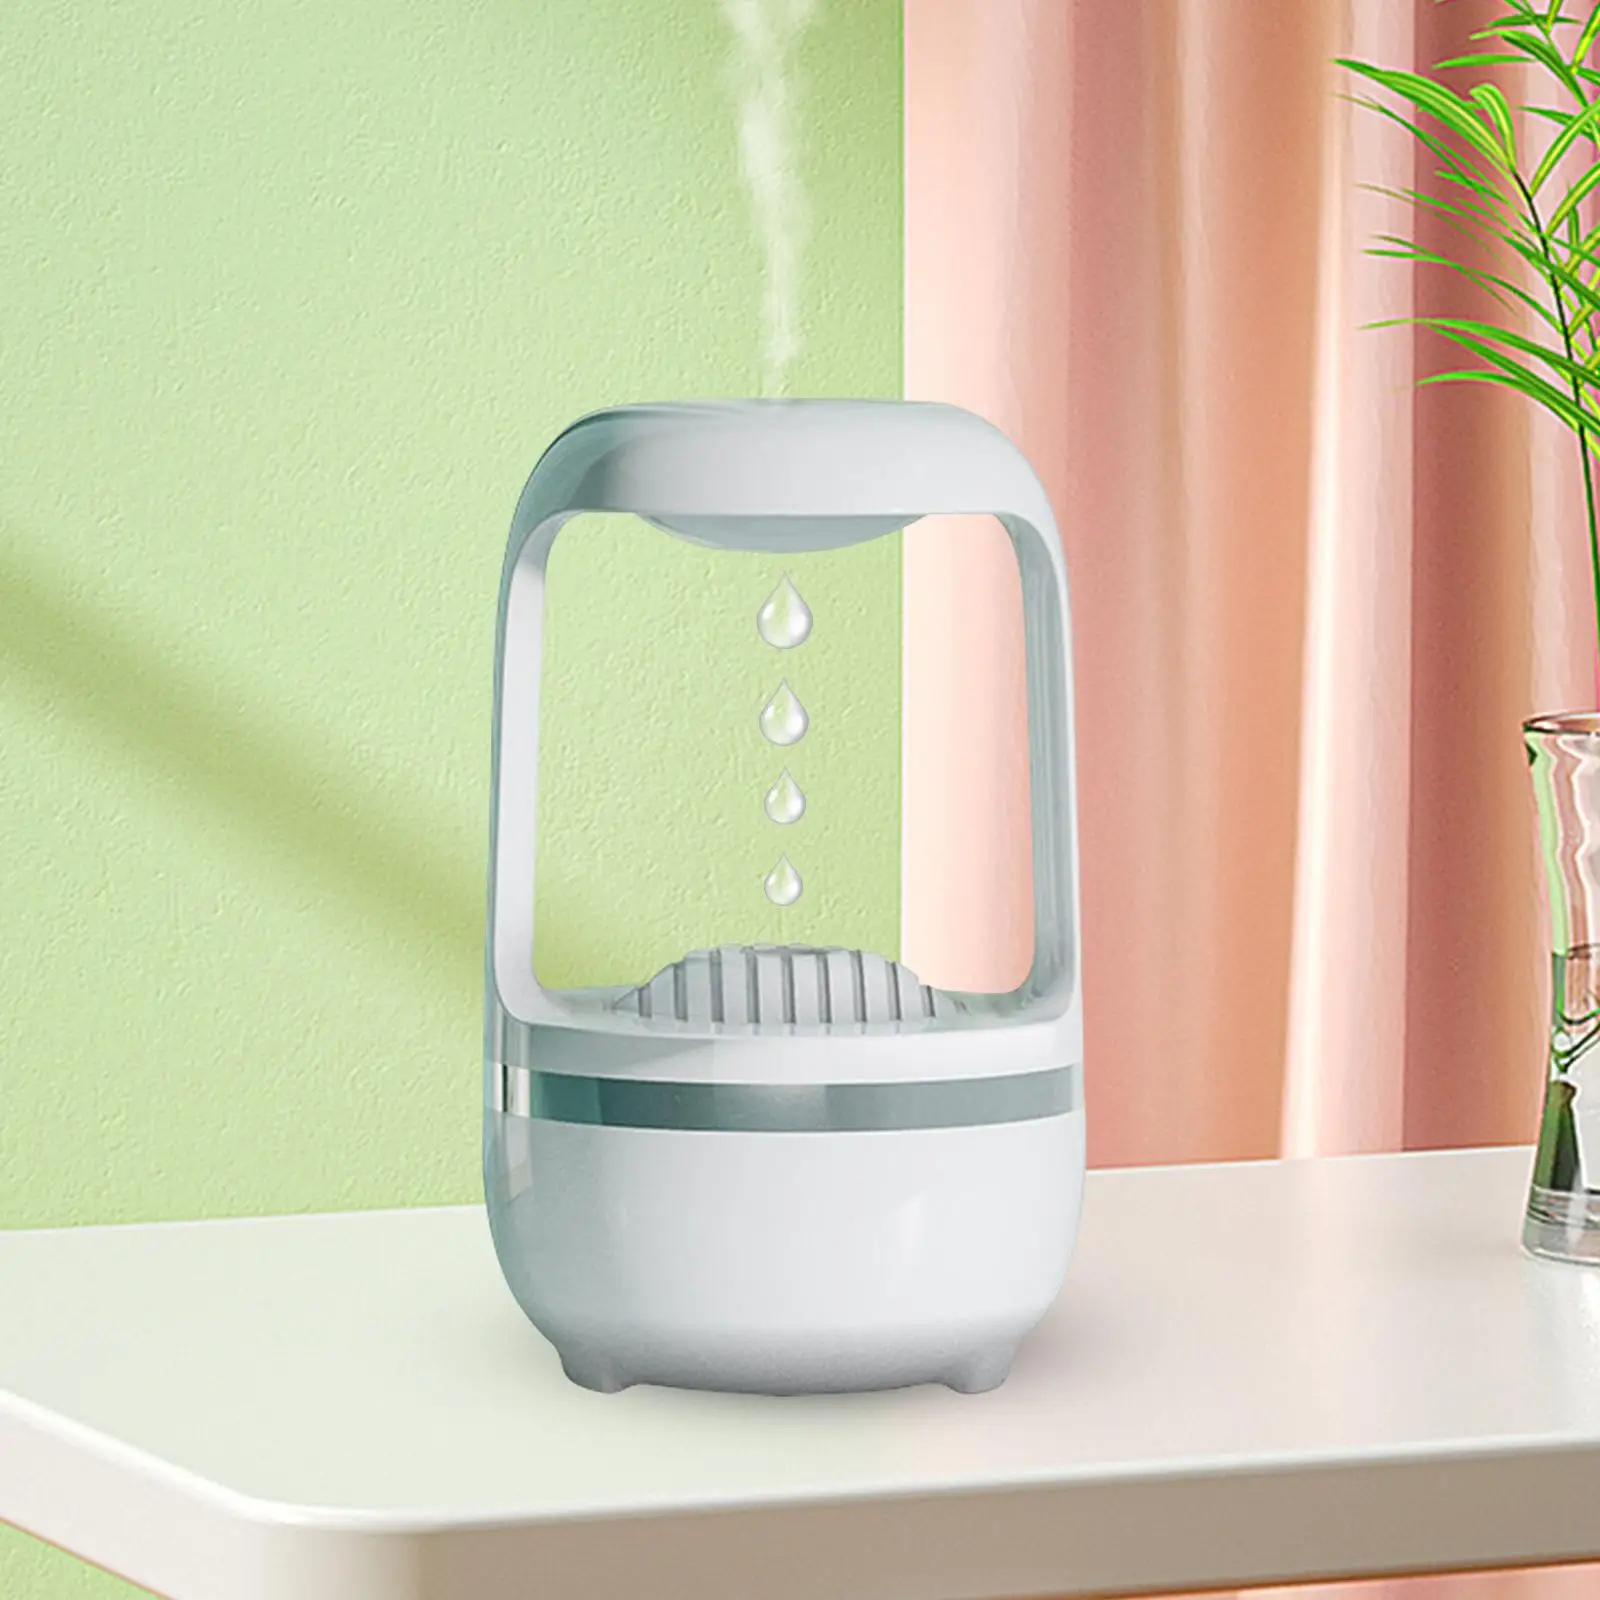 Desktop Humidifiers 500ml Water Tank USB Rechargeable Portable Air Humidifier Diffuser for Living Room Travel Dorm Home